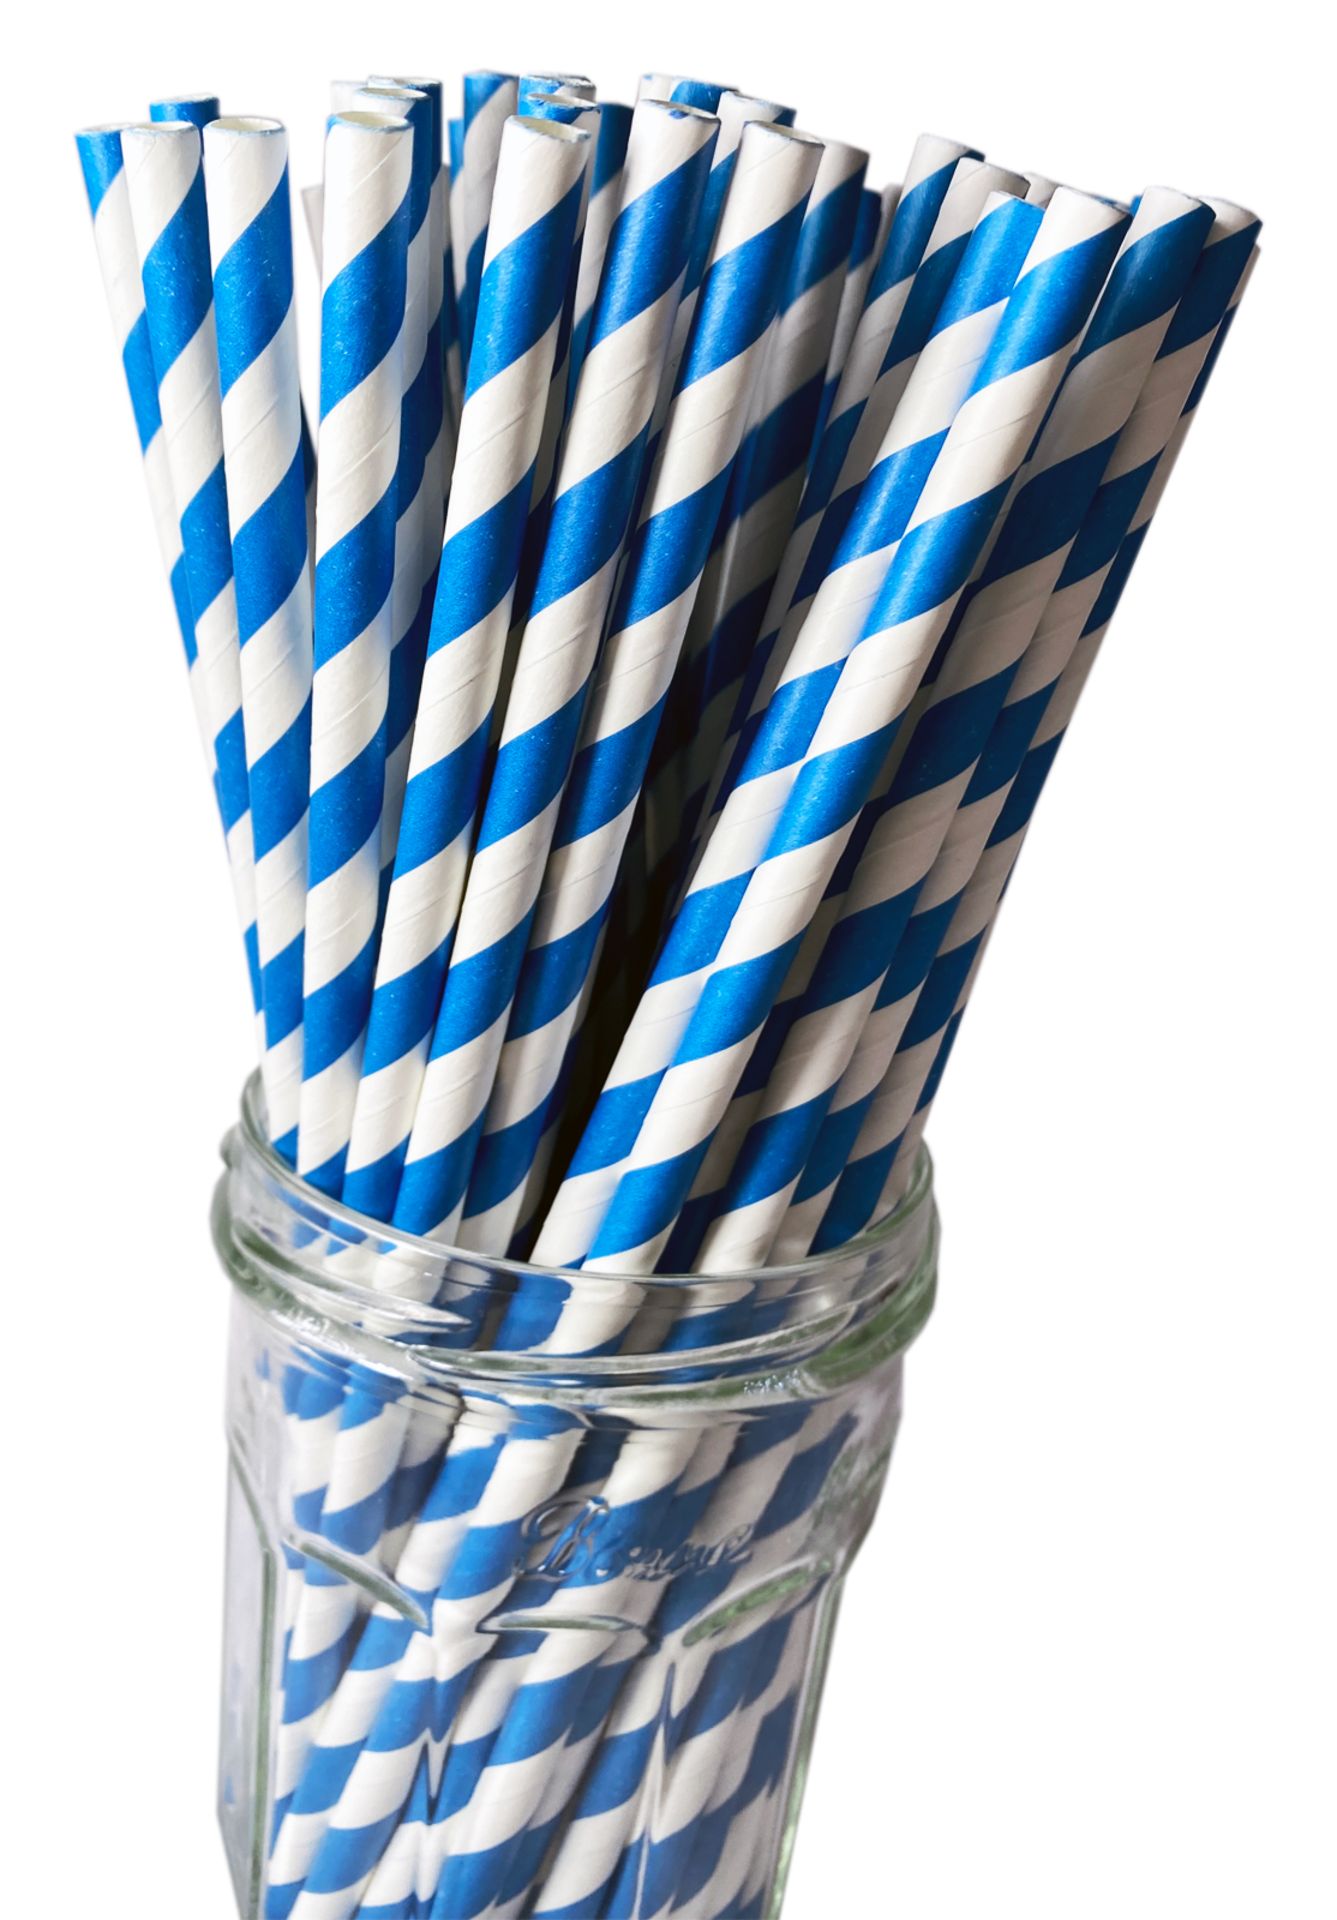 2 x Boxes of Candy Twist Paper Straws by 888 Gastro Disposables | DSP48 - Image 4 of 5